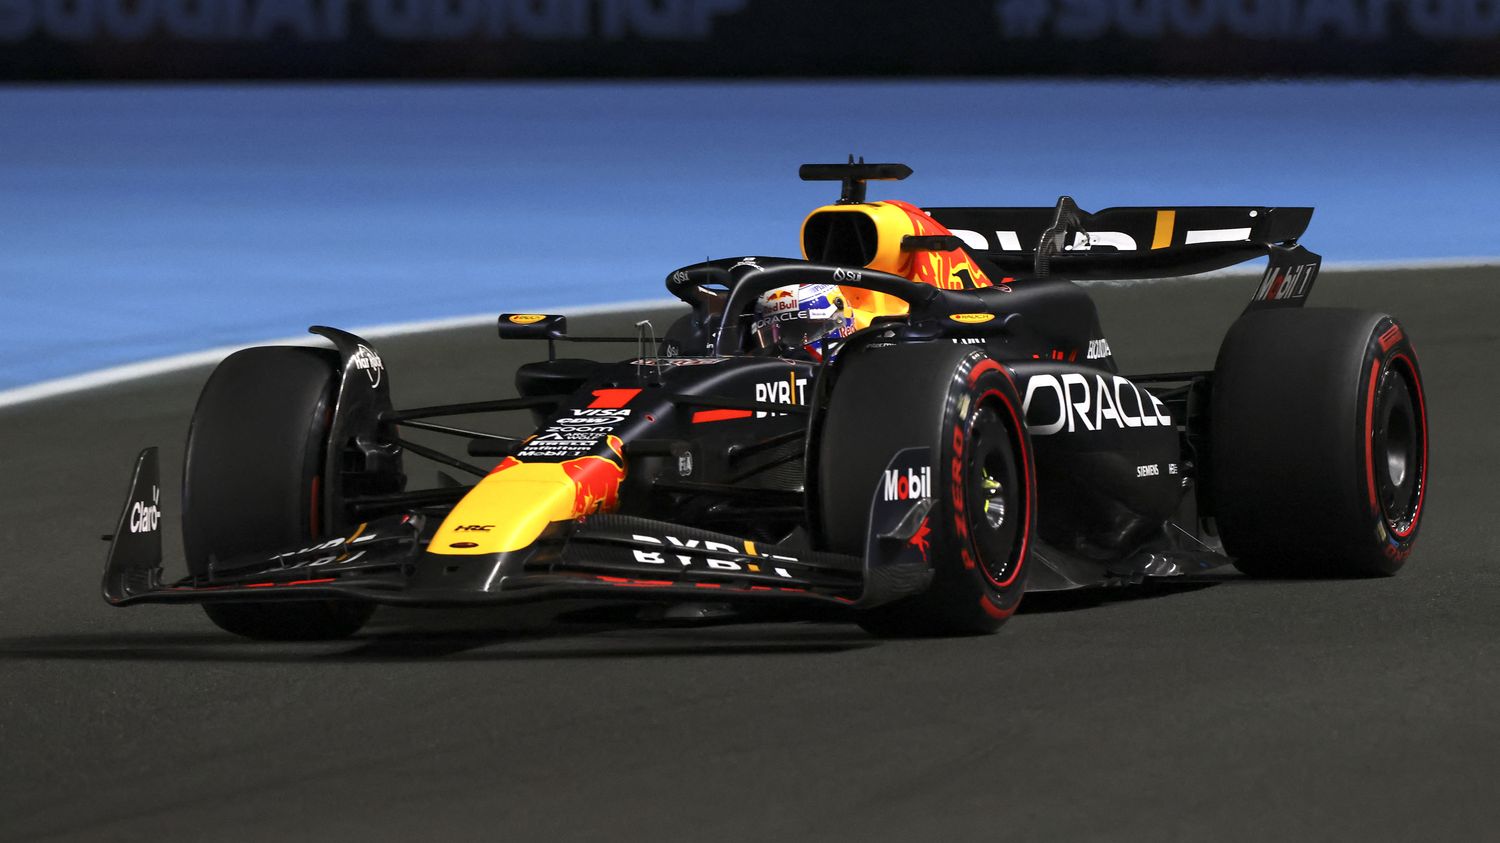 F1: Max Verstappen on pole position at the Saudi Arabian Grand Prix, Charles Leclerc second